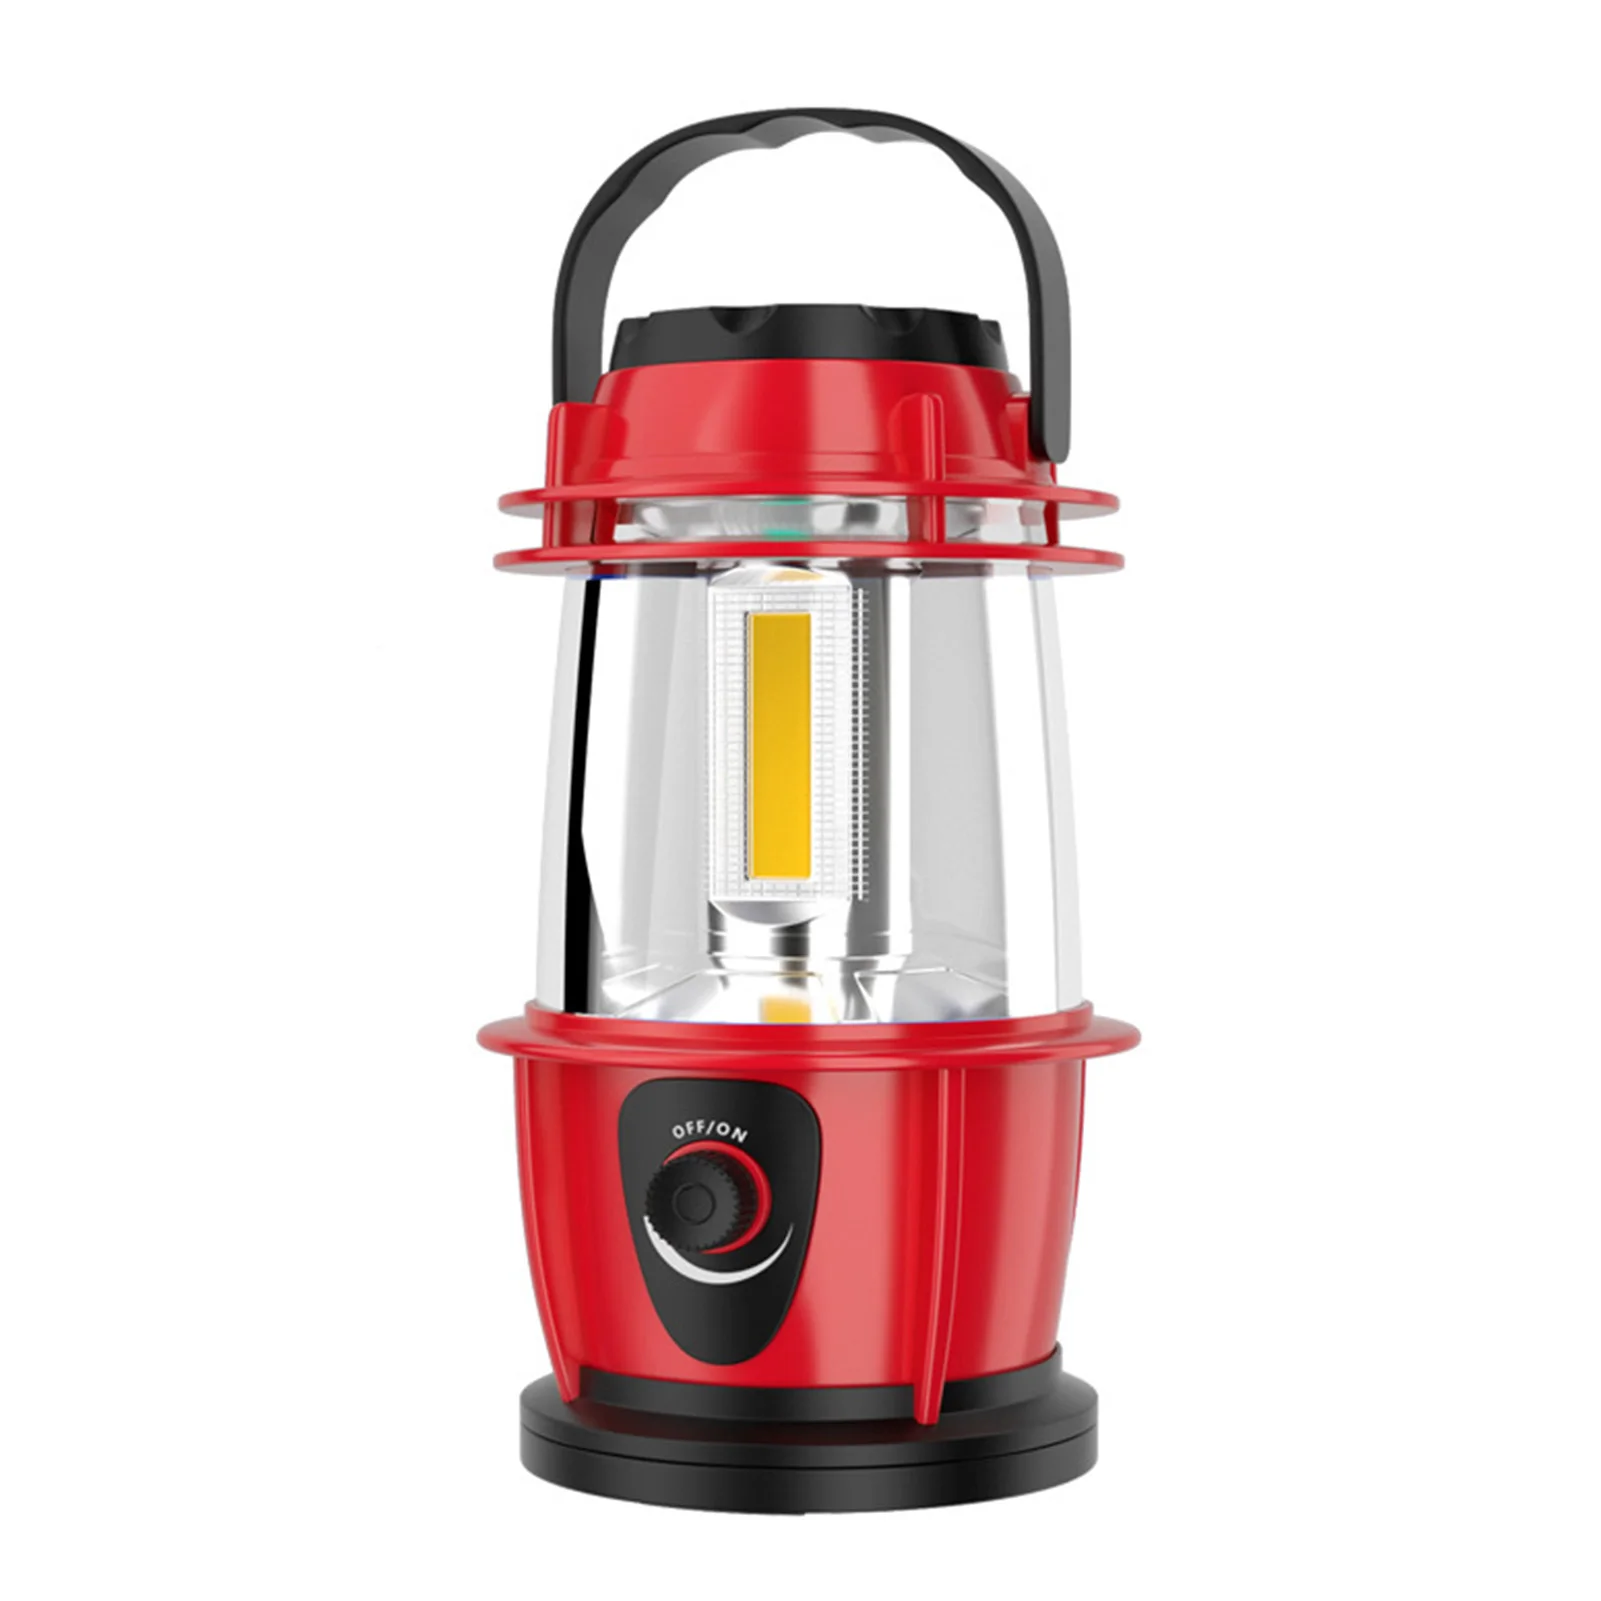 

Multi-functional Outdoors Lantern with 360° Coverage for Daily Power Outage Emergency Use B2Cshop